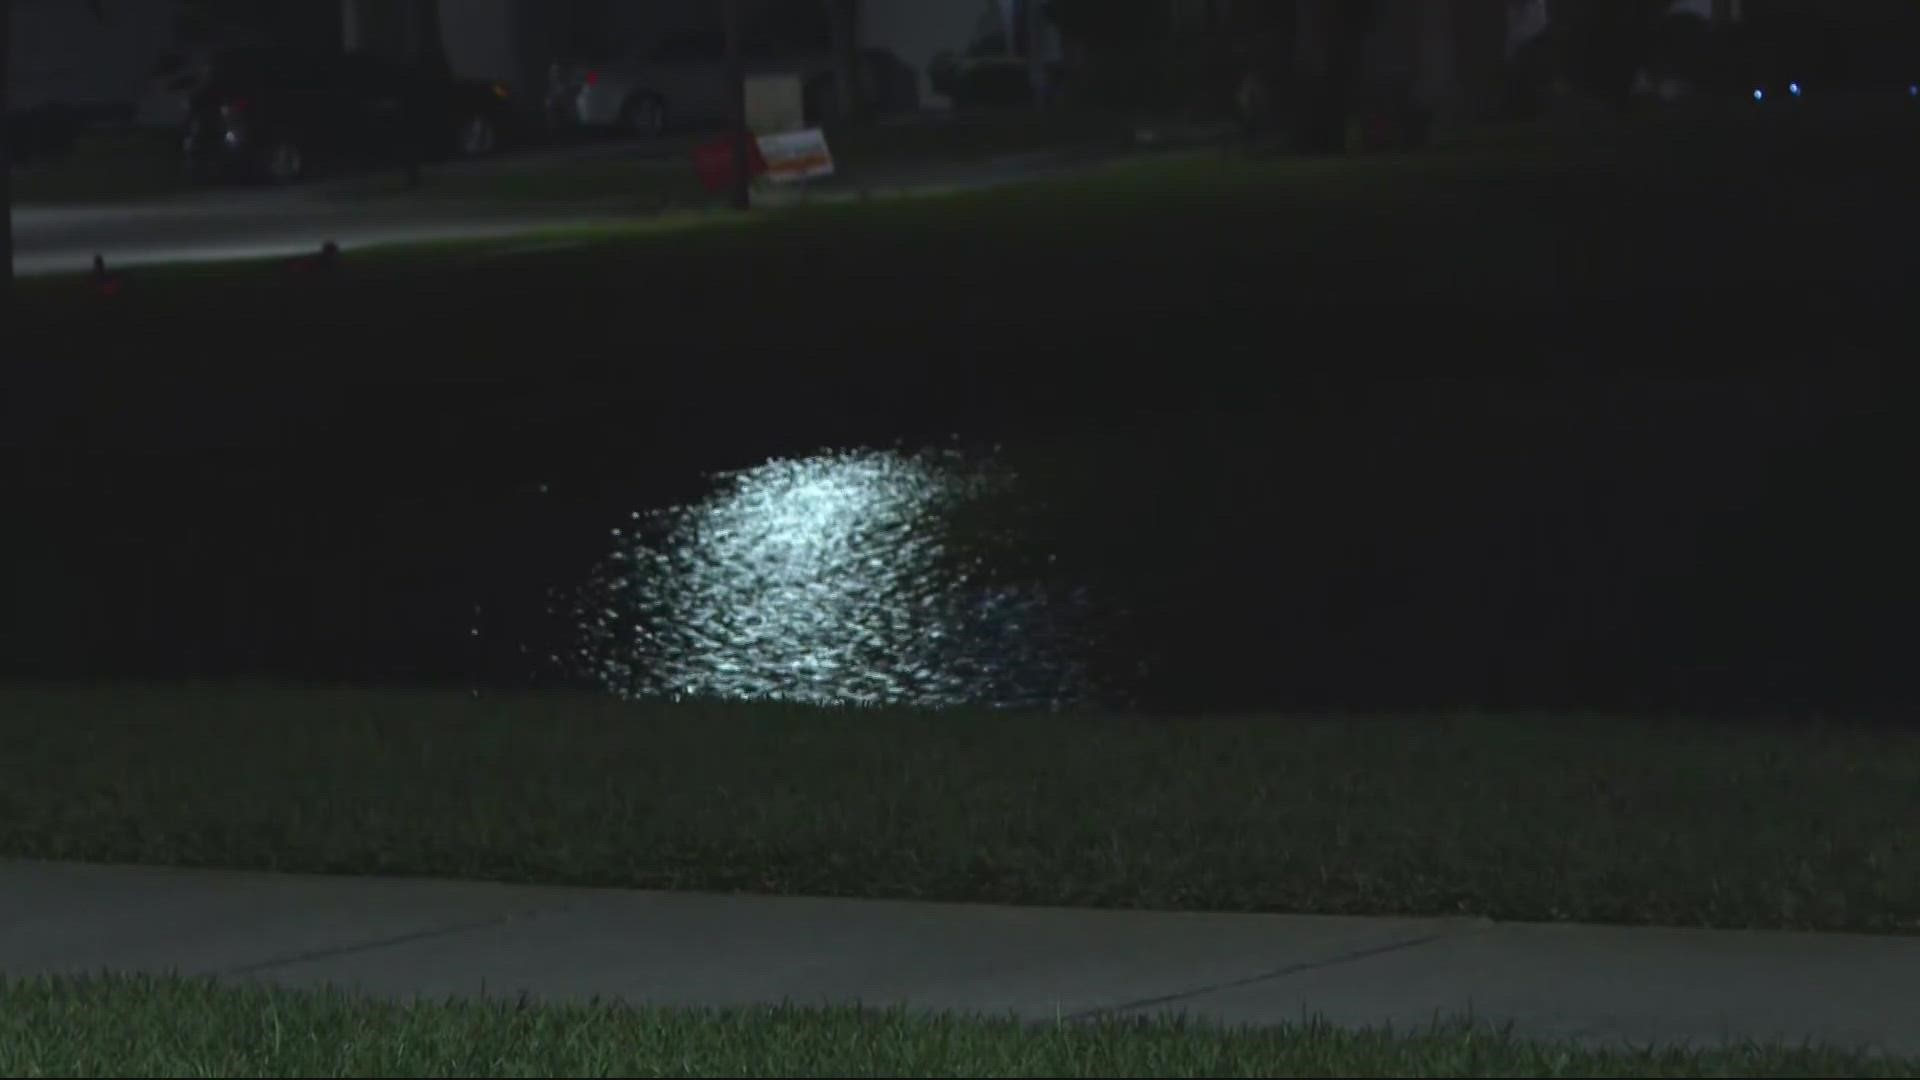 About 40 minutes after the child was reported missing, a bloodhound tracked their scent to a pond in their neighborhood. They were pronounced dead at the hospital.